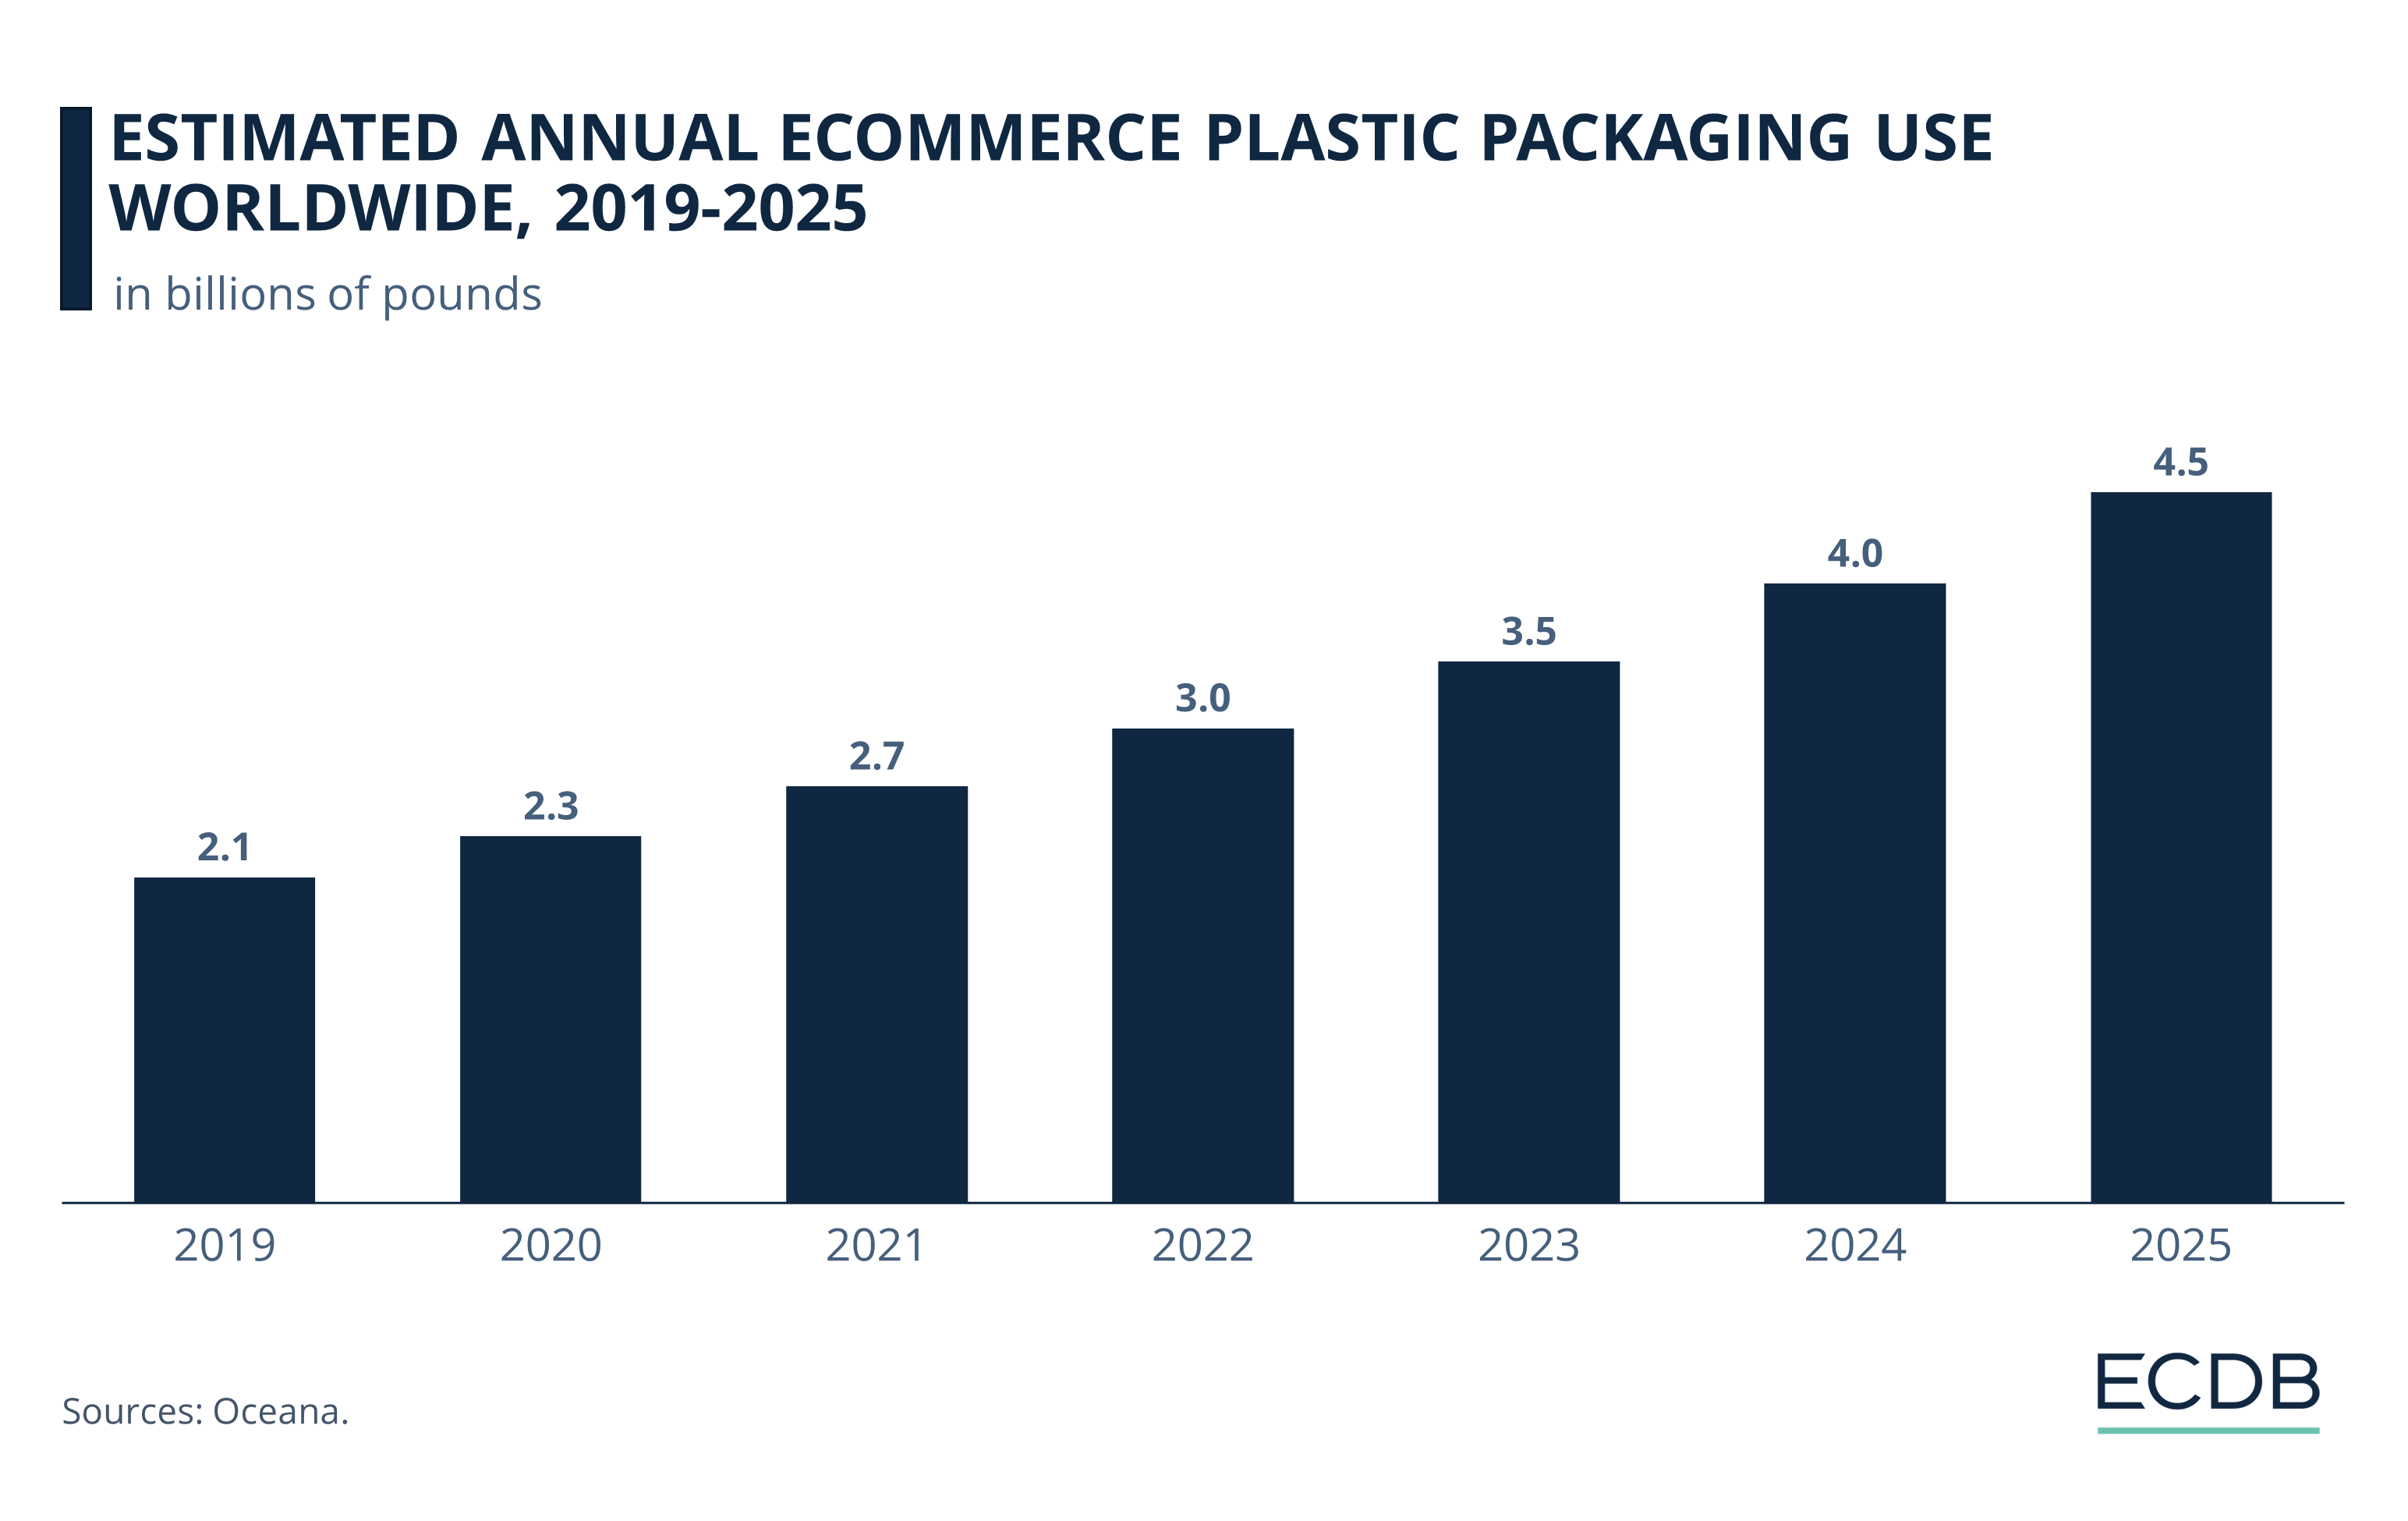 Estimated annual e-commerce plastic packaging use in 2019 with projections to 2025